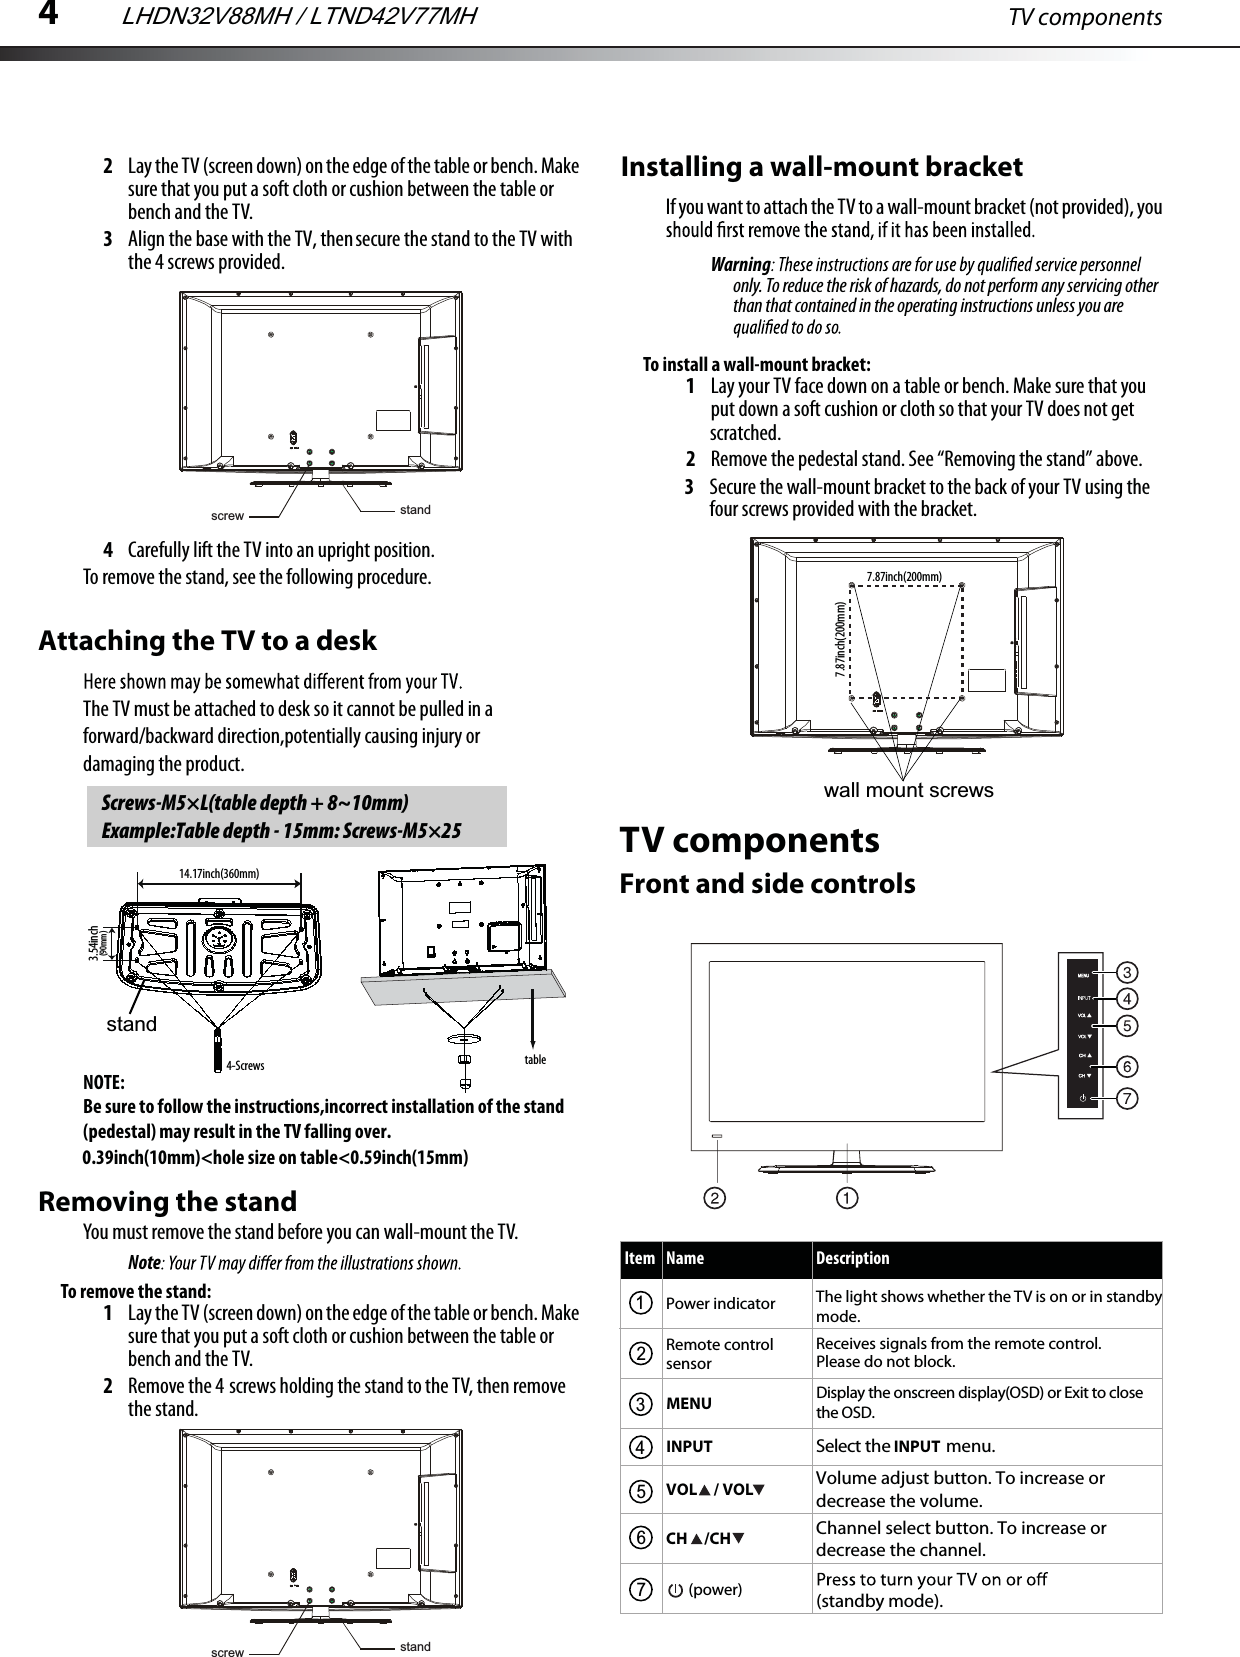 4TV components2Lay the TV (screen down) on the edge of the table or bench. Make sure that you put a soft cloth or cushion between the table or bench and the TV.3Align the base with the TV, then secure the stand to the TV with the 4 screws provided.4Carefully lift the TV into an upright position.To remove the stand, see the following procedure.The TV must be attached to desk so it cannot be pulled in a forward/backward direction,potentially causing injury ordamaging the product.NOTE:Be sure to follow the instructions,incorrect installation of the stand(pedestal) may result in the TV falling over.Removing the standAttaching the TV to a deskYou must remove the stand before you can wall-mount the TV.NoteTo remove the stand:1Lay the TV (screen down) on the edge of the table or bench. Make sure that you put a soft cloth or cushion between the table or bench and the TV.2Remove the 4 screws holding the stand to the TV, then remove the stand.Installing a wall-mount bracketIf you want to attach the TV to a wall-mount bracket (not provided), you Warningonly. To reduce the risk of hazards, do not perform any servicing other than that contained in the operating instructions unless you are To install a wall-mount bracket:1Lay your TV face down on a table or bench. Make sure that you put down a soft cushion or cloth so that your TV does not get 2Remove the pedestal stand. See “Removing the stand” above.3Secure the wall-mount bracket to the back of your TV using the four screws provided with the bracket.TV componentsFront and side controlsItem Name DescriptionPower indicator The light shows whether the TV is on or in standby mode.Remote control sensorReceives signals from the remote control. Please do not block. MENU Display the onscreen display(OSD) or Exit to close the OSD.INPUT Select the INPUT  menu. VOL / VOL Volume adjust button. To increase or decrease the volume. Channel select button. To increase or decrease the channel. CH /CH (power) (standby mode).5671234Screws-M5×L(table depth + 8~10mm)Example:Table depth - 15mm: Screws-M5×2514.17inch(360mm)4-Screws table3.54inch(90mm)standscrewstandscrewLHDN32V88MH / LTND42V77MHstandscratched.wall mount screws7.87inch(200mm)7.87inch(200mm)0.39inch(10mm)&lt;hole size on table&lt;0.59inch(15mm)